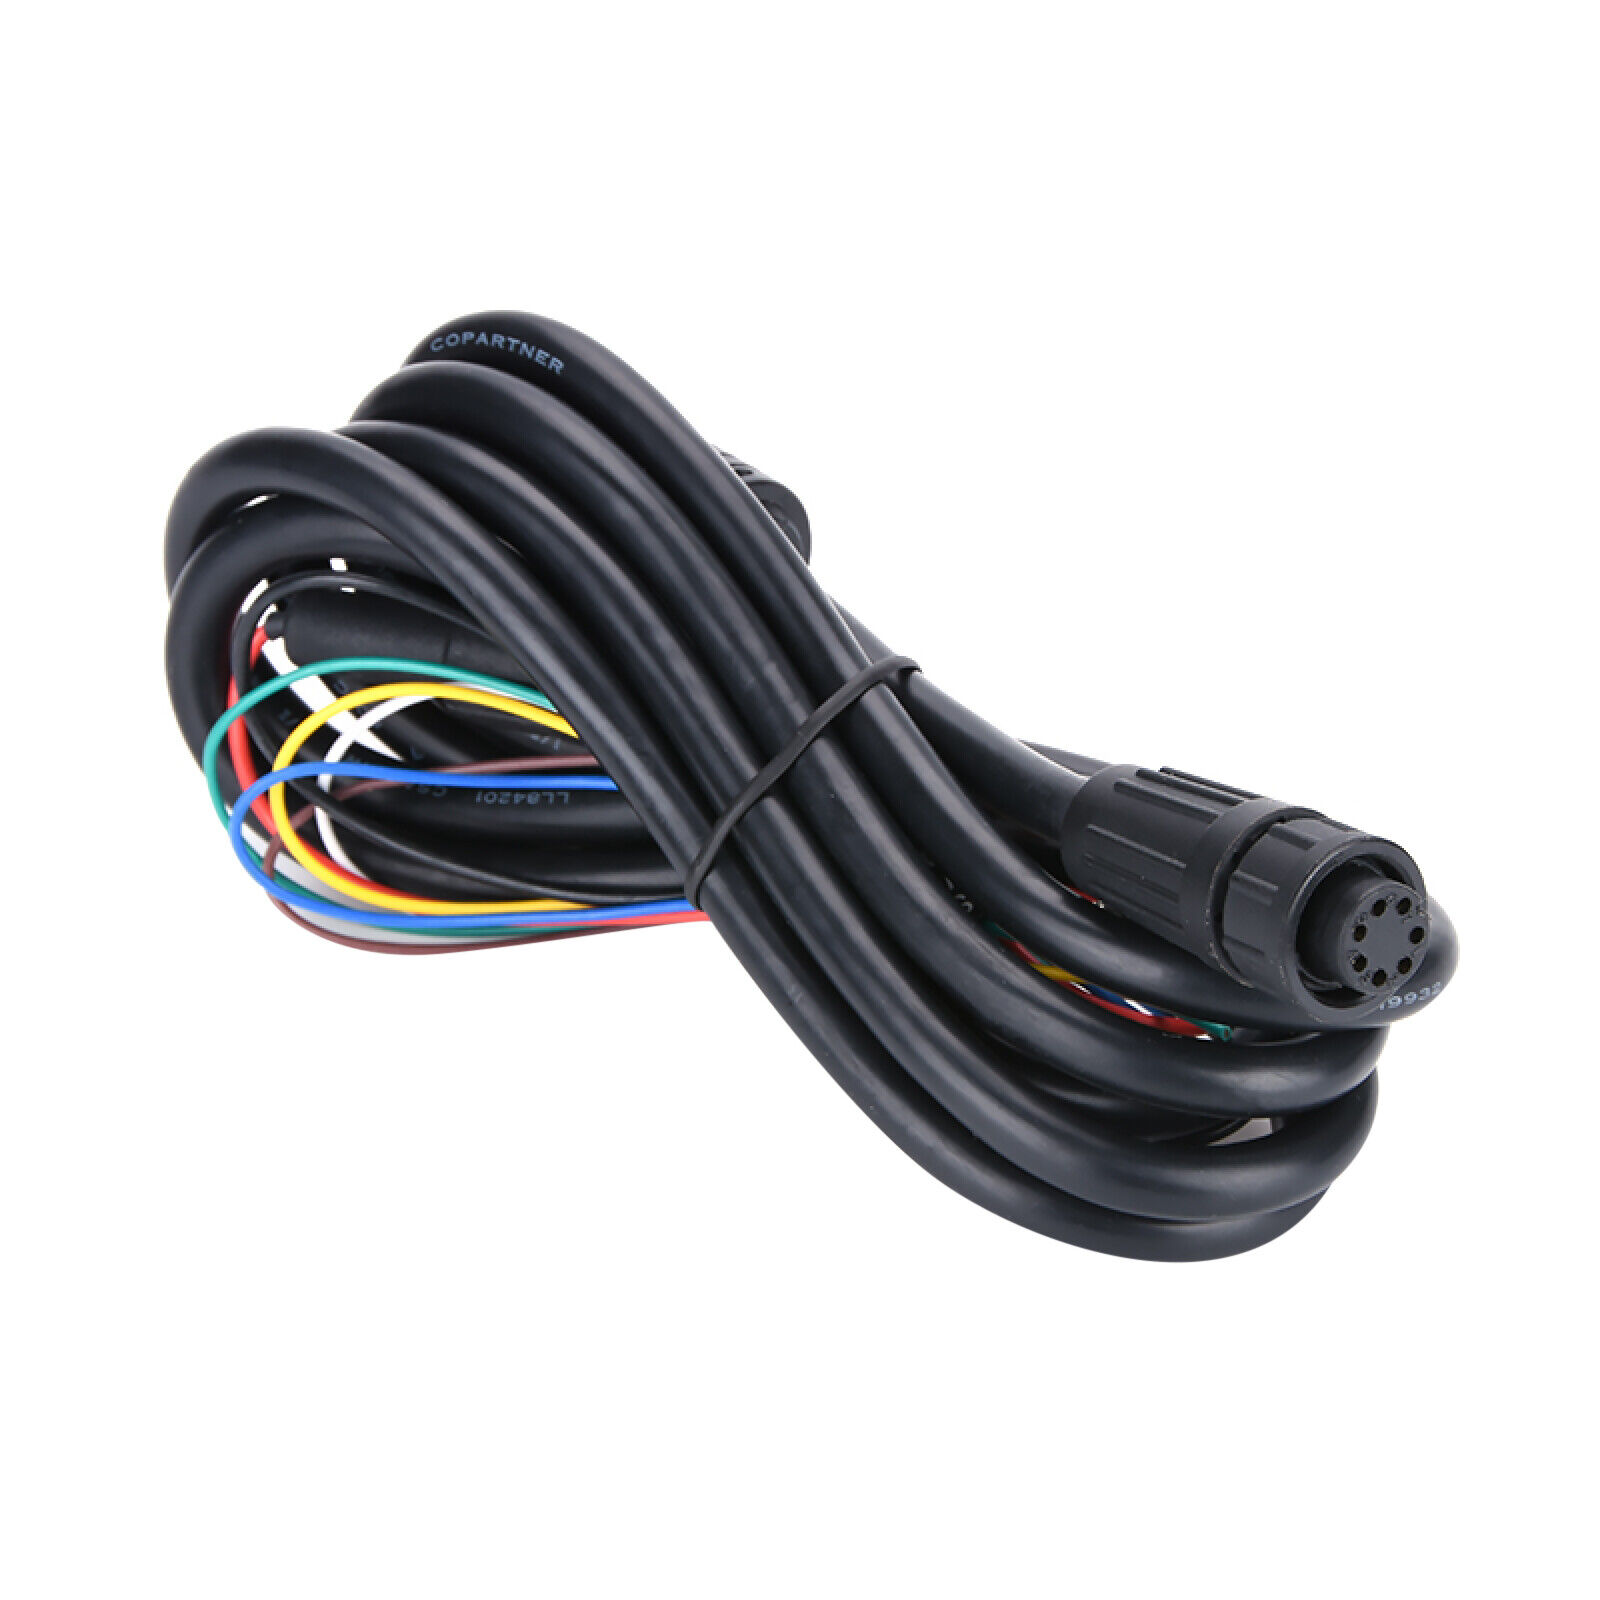 Durable 7-Pin Power Cable For GARMIN POWER CABLE GPSMAP 128 152 192C 580 GPS D